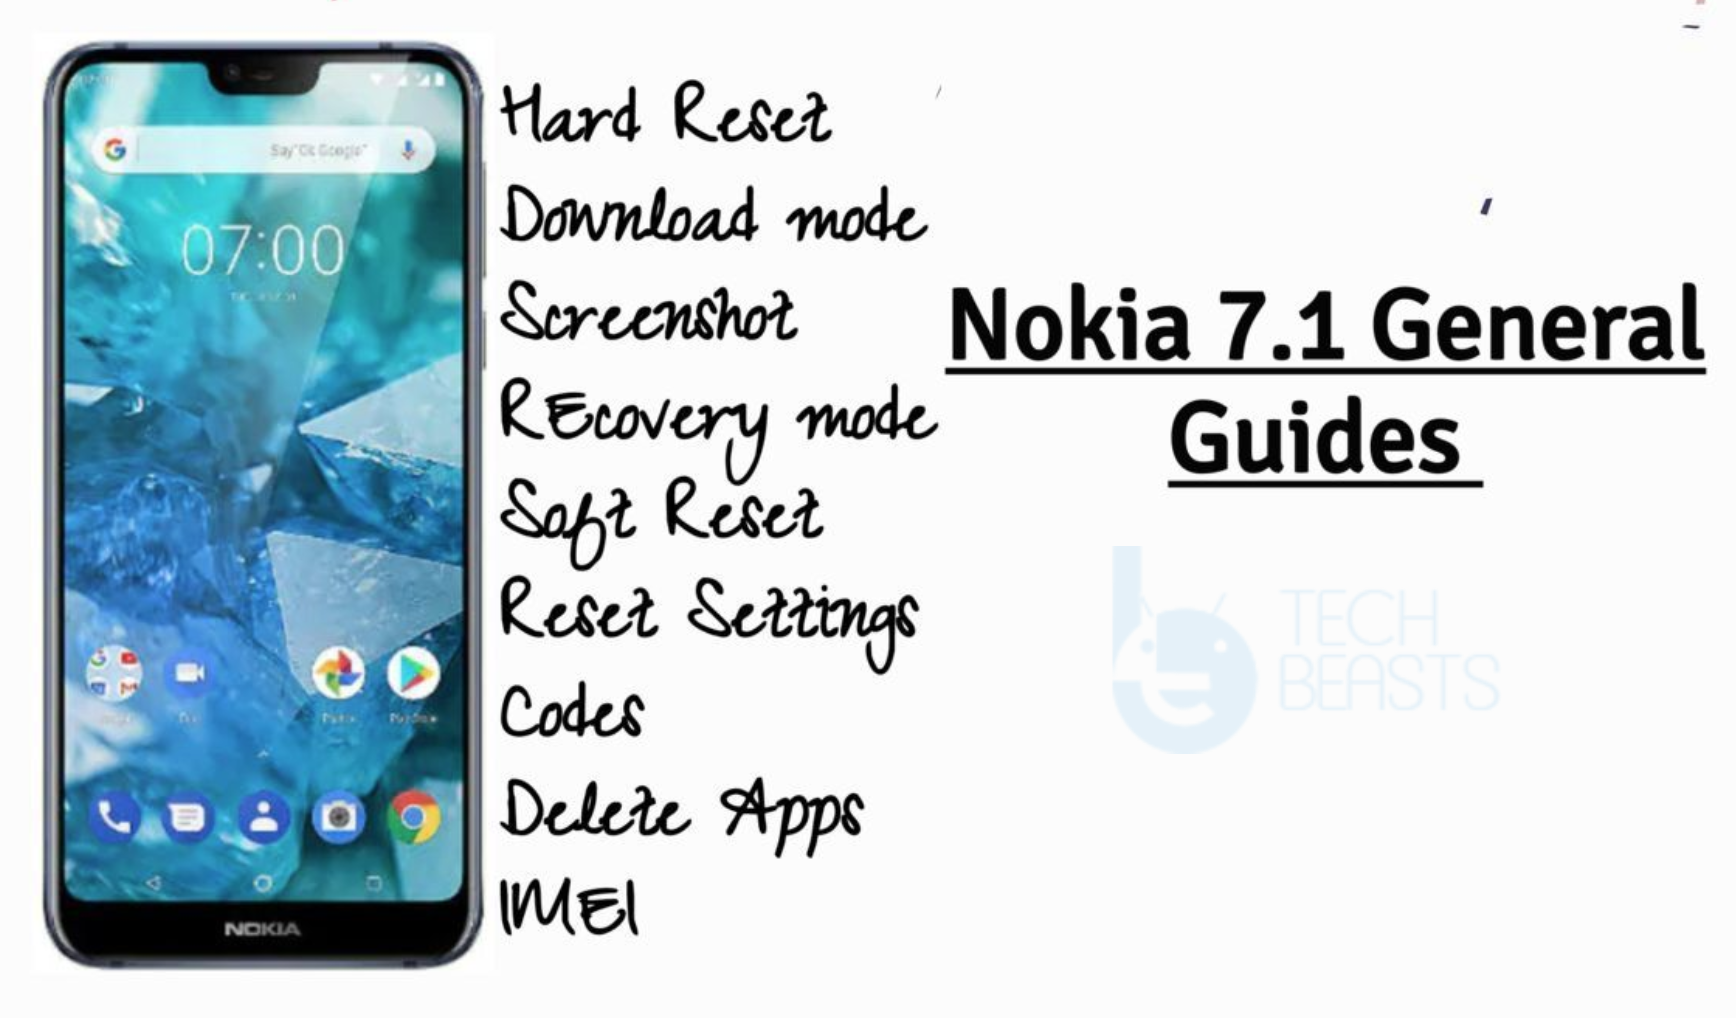 Nokia 7.1 General Guides